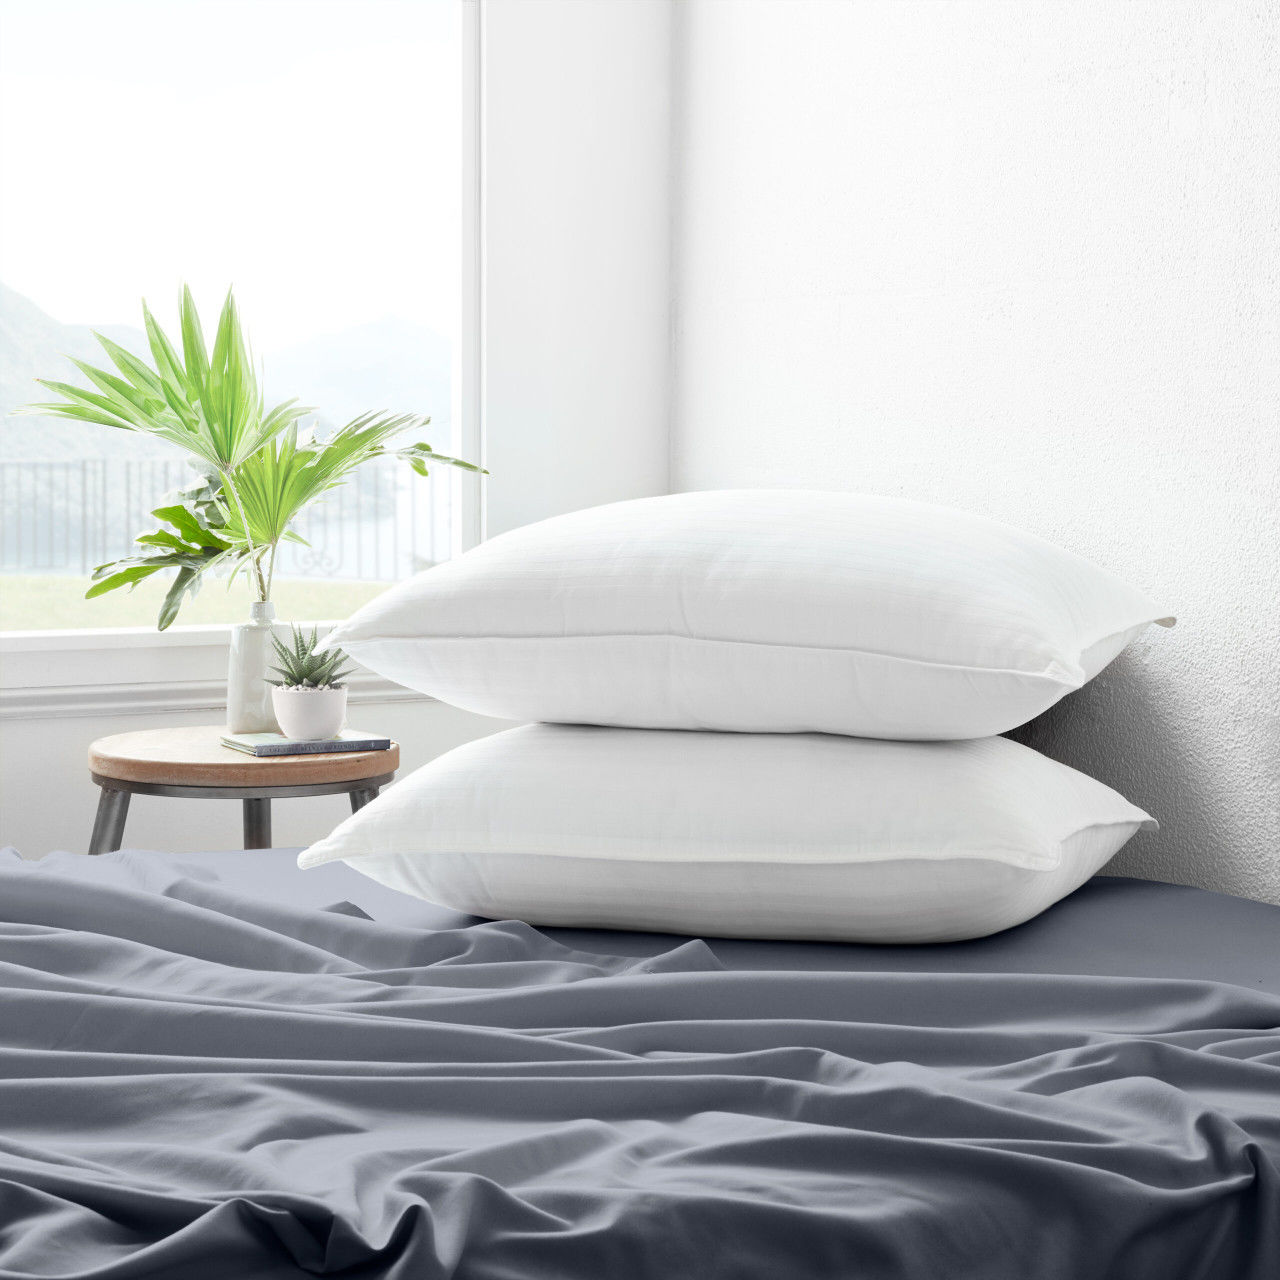 Is the plush down-alternative gel-fiber pillow made of what material?